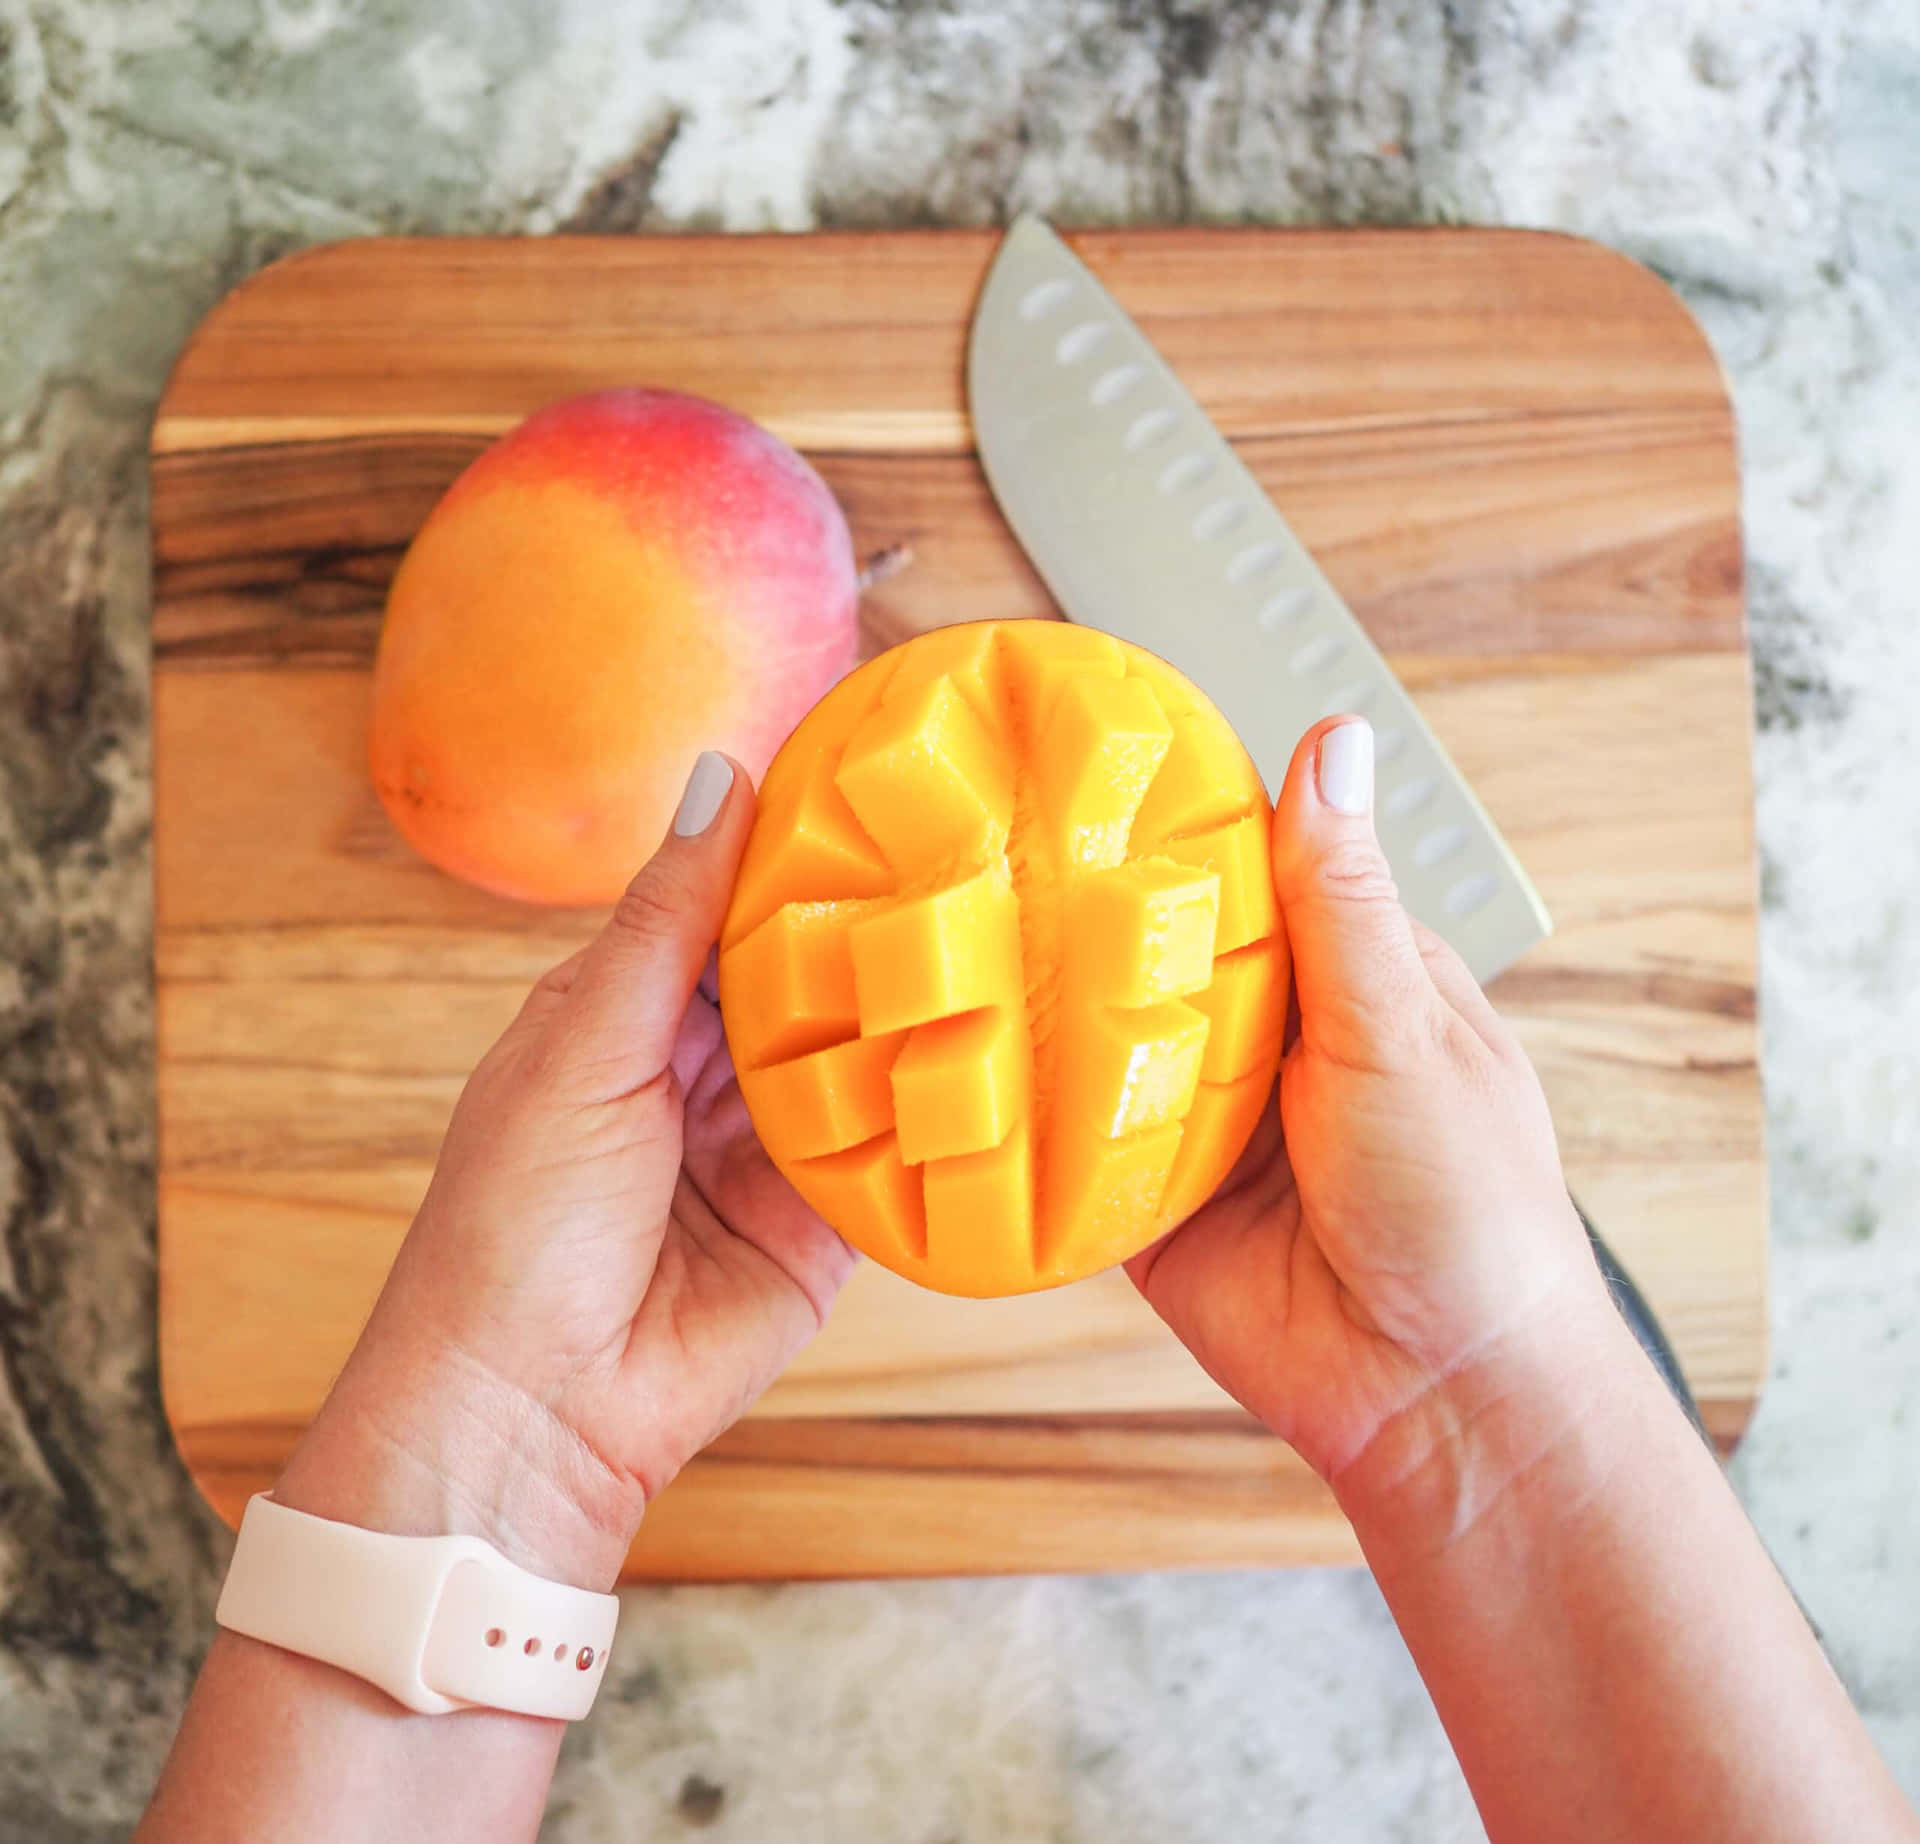 A Woman's Hand Holding A Mango On A Cutting Board